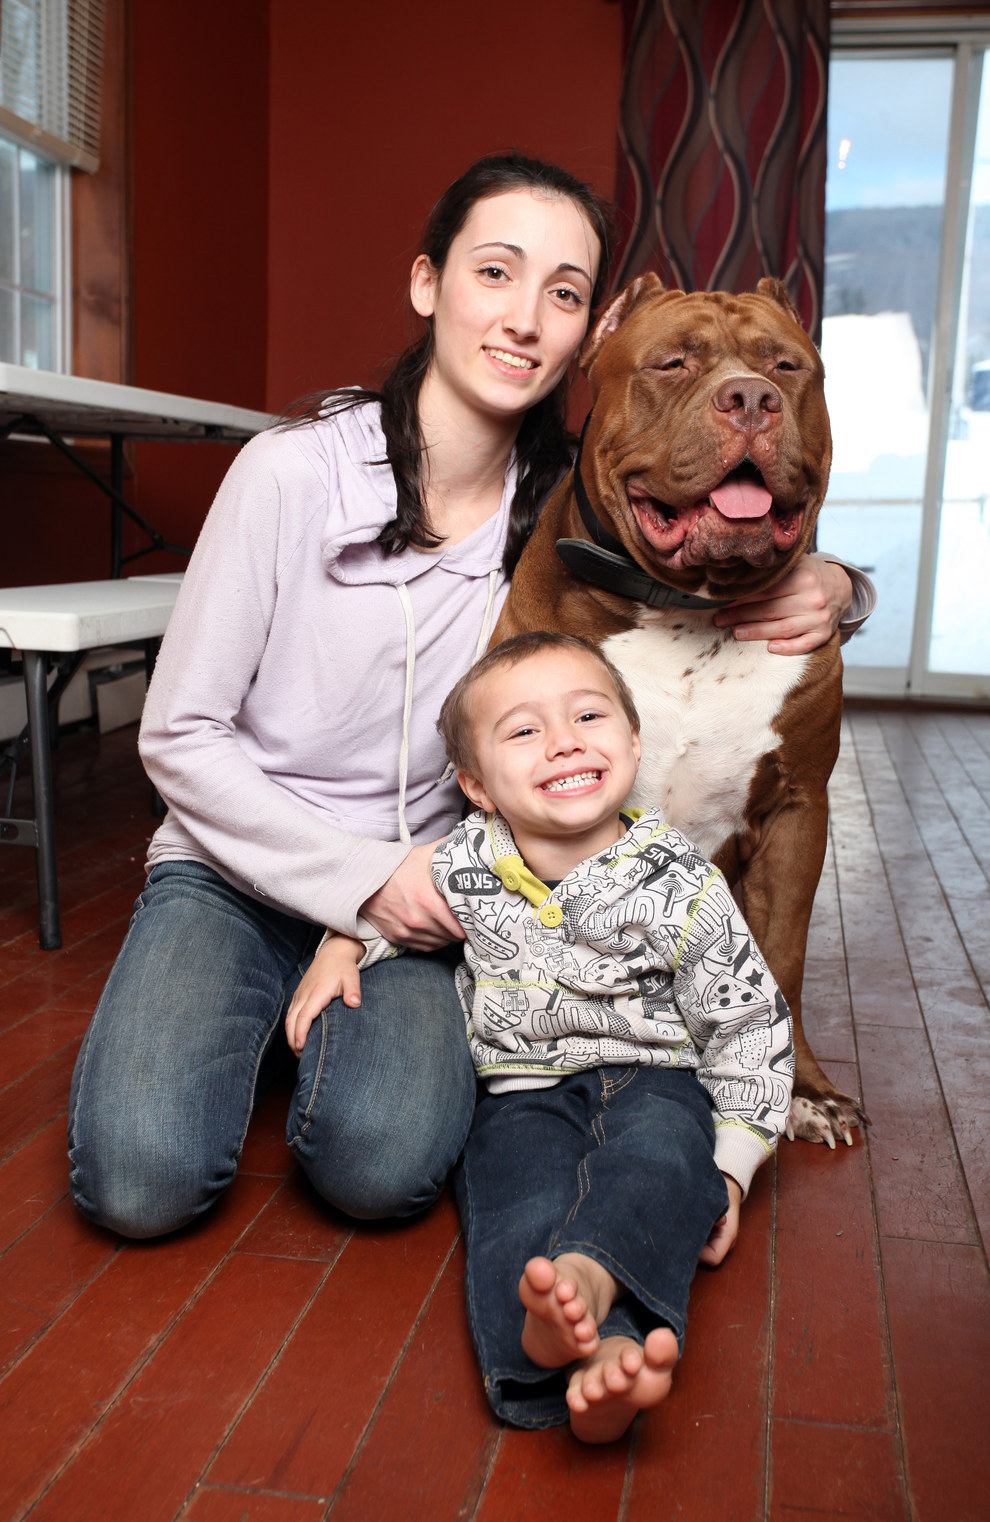 This Huge 175-Pound Pit Bull Helps Dispel Perceptions About The